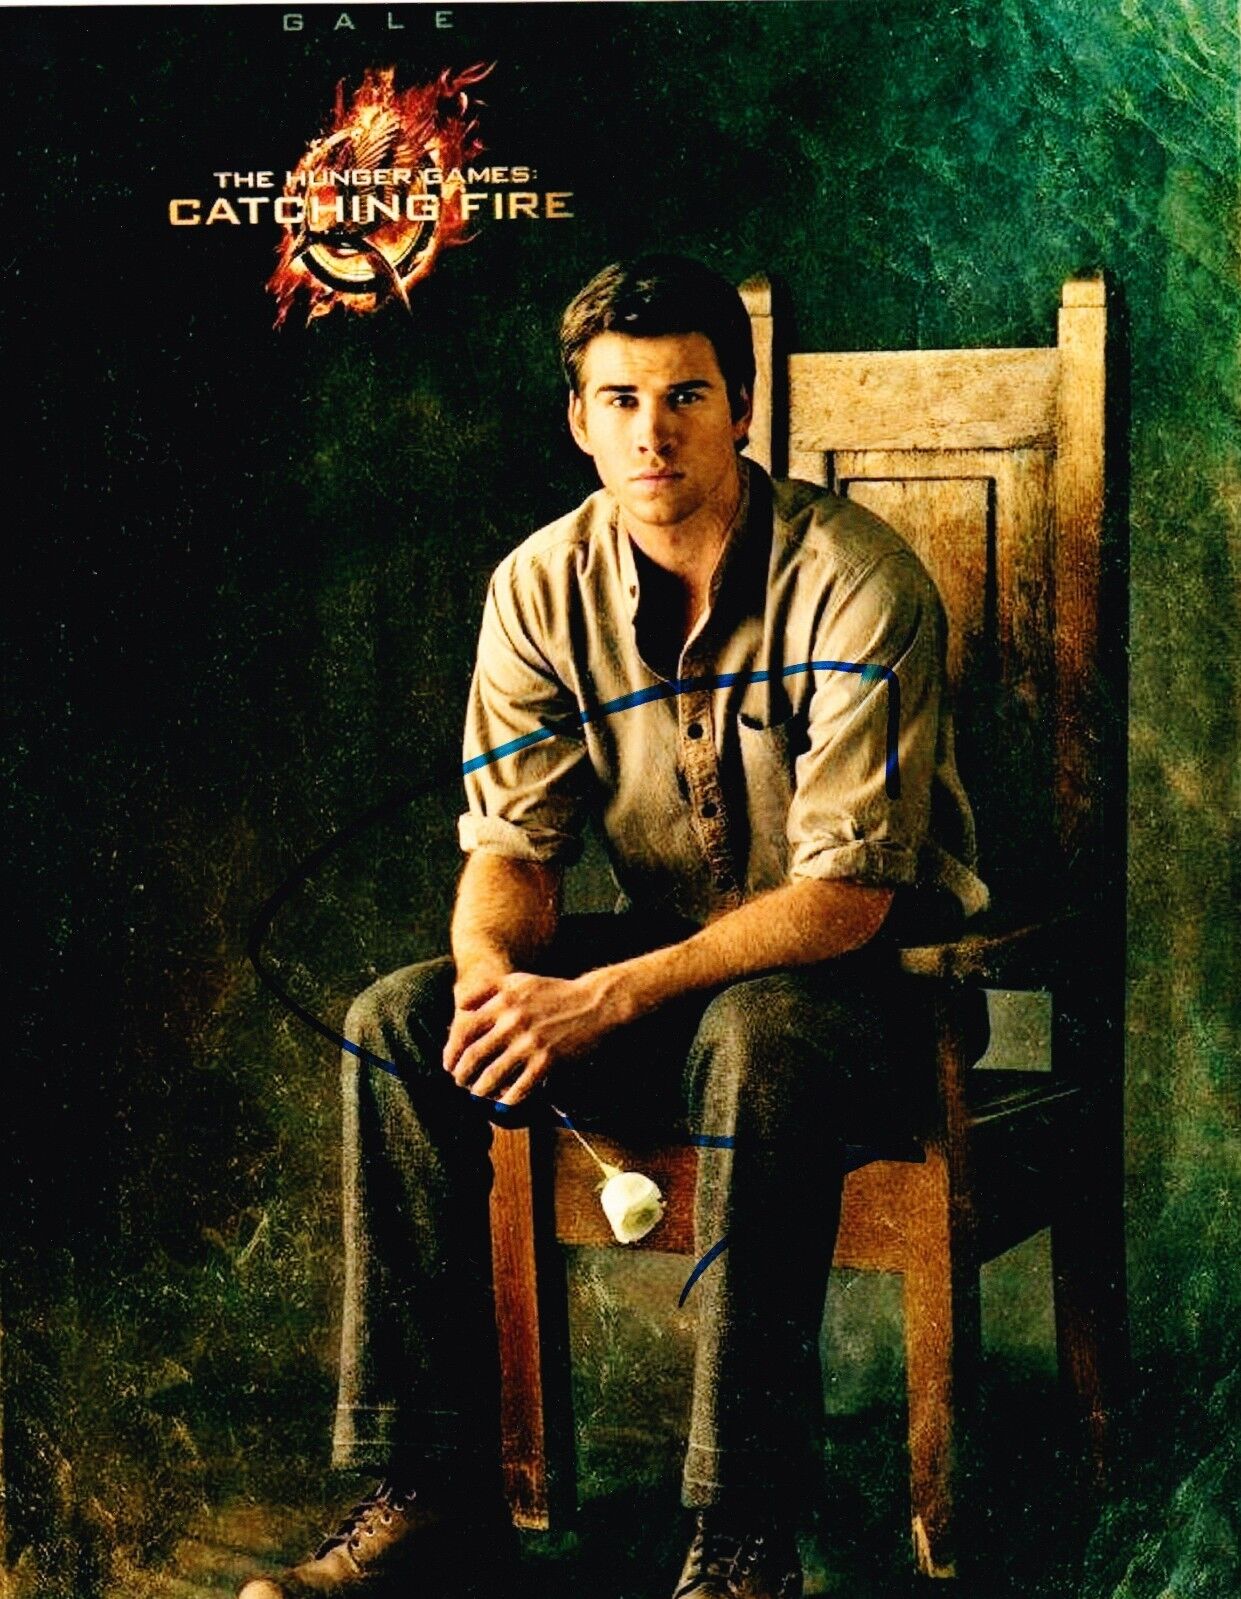 LIAM HEMSWORTH SIGNED 8X10 PHOTO AUTOGRAPH GALE HUNGER GAMES CATCHING FIRE COA B